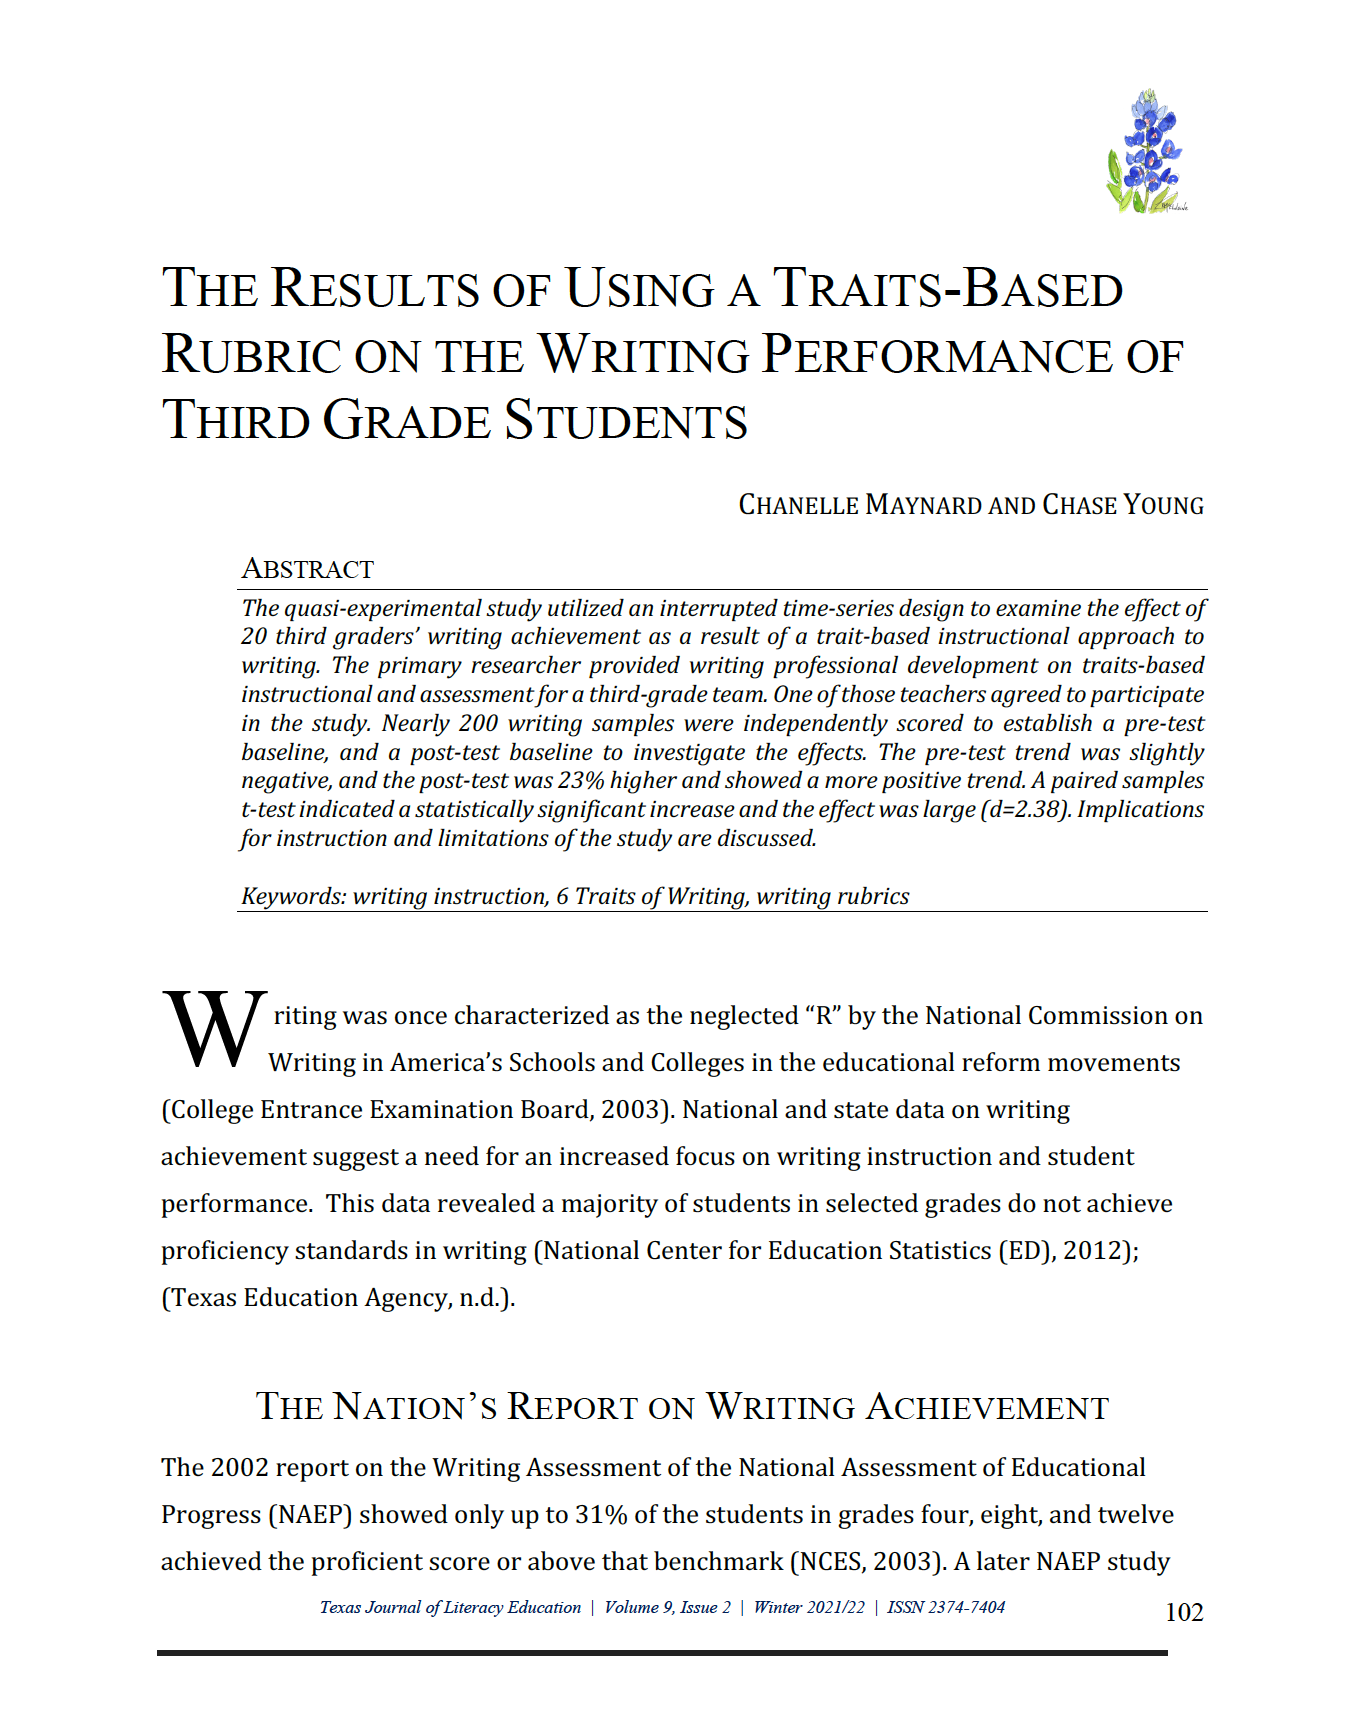 screenshot of first page of Maynard & Young article "The Results of Using a Traits-Based Rubric on the Writing Performance of Third Grade Students"